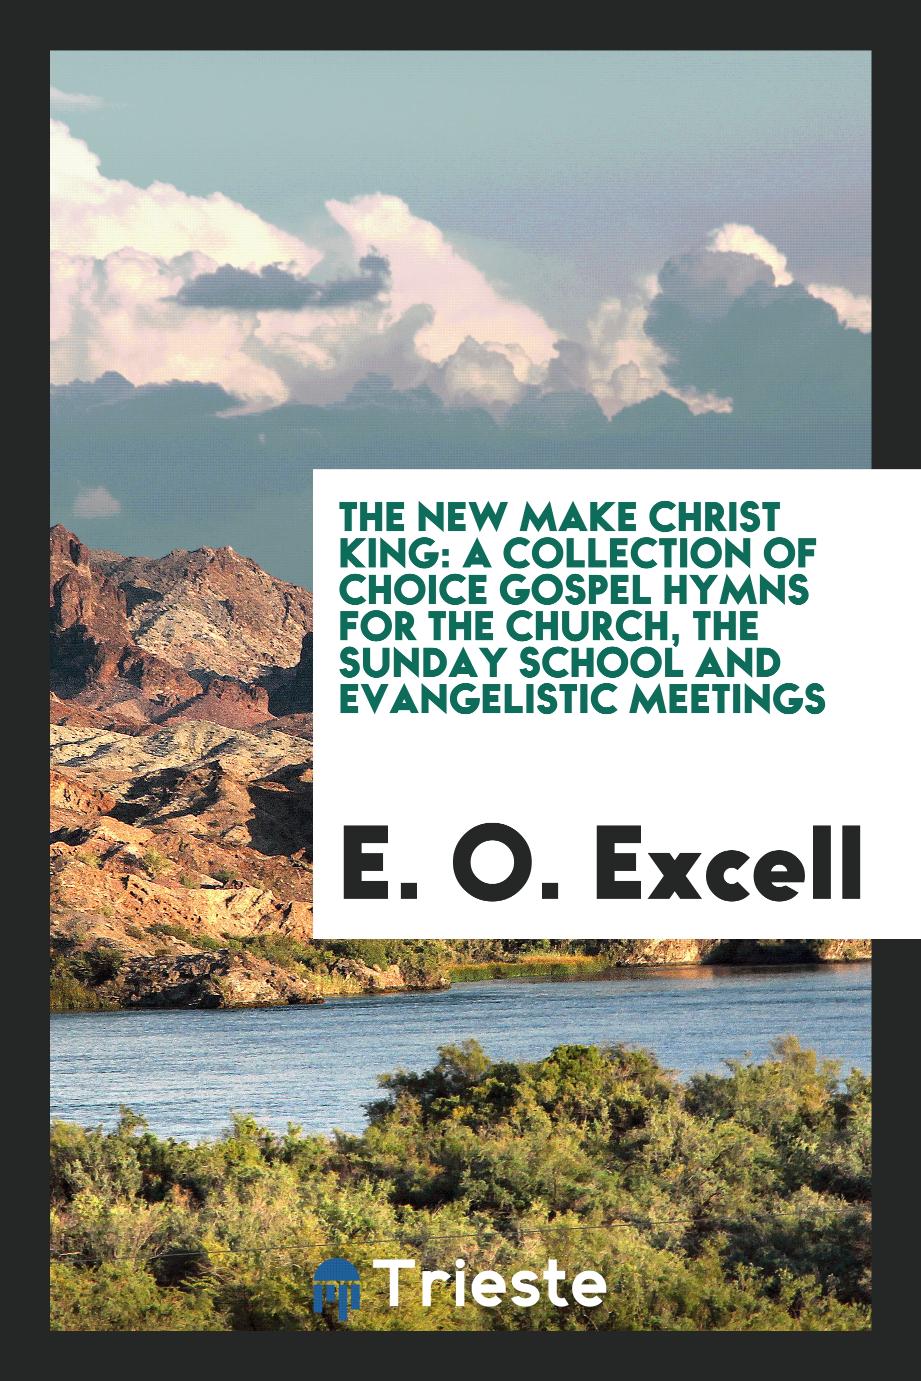 The new make Christ king: a collection of choice gospel hymns for the church, the Sunday school and evangelistic meetings